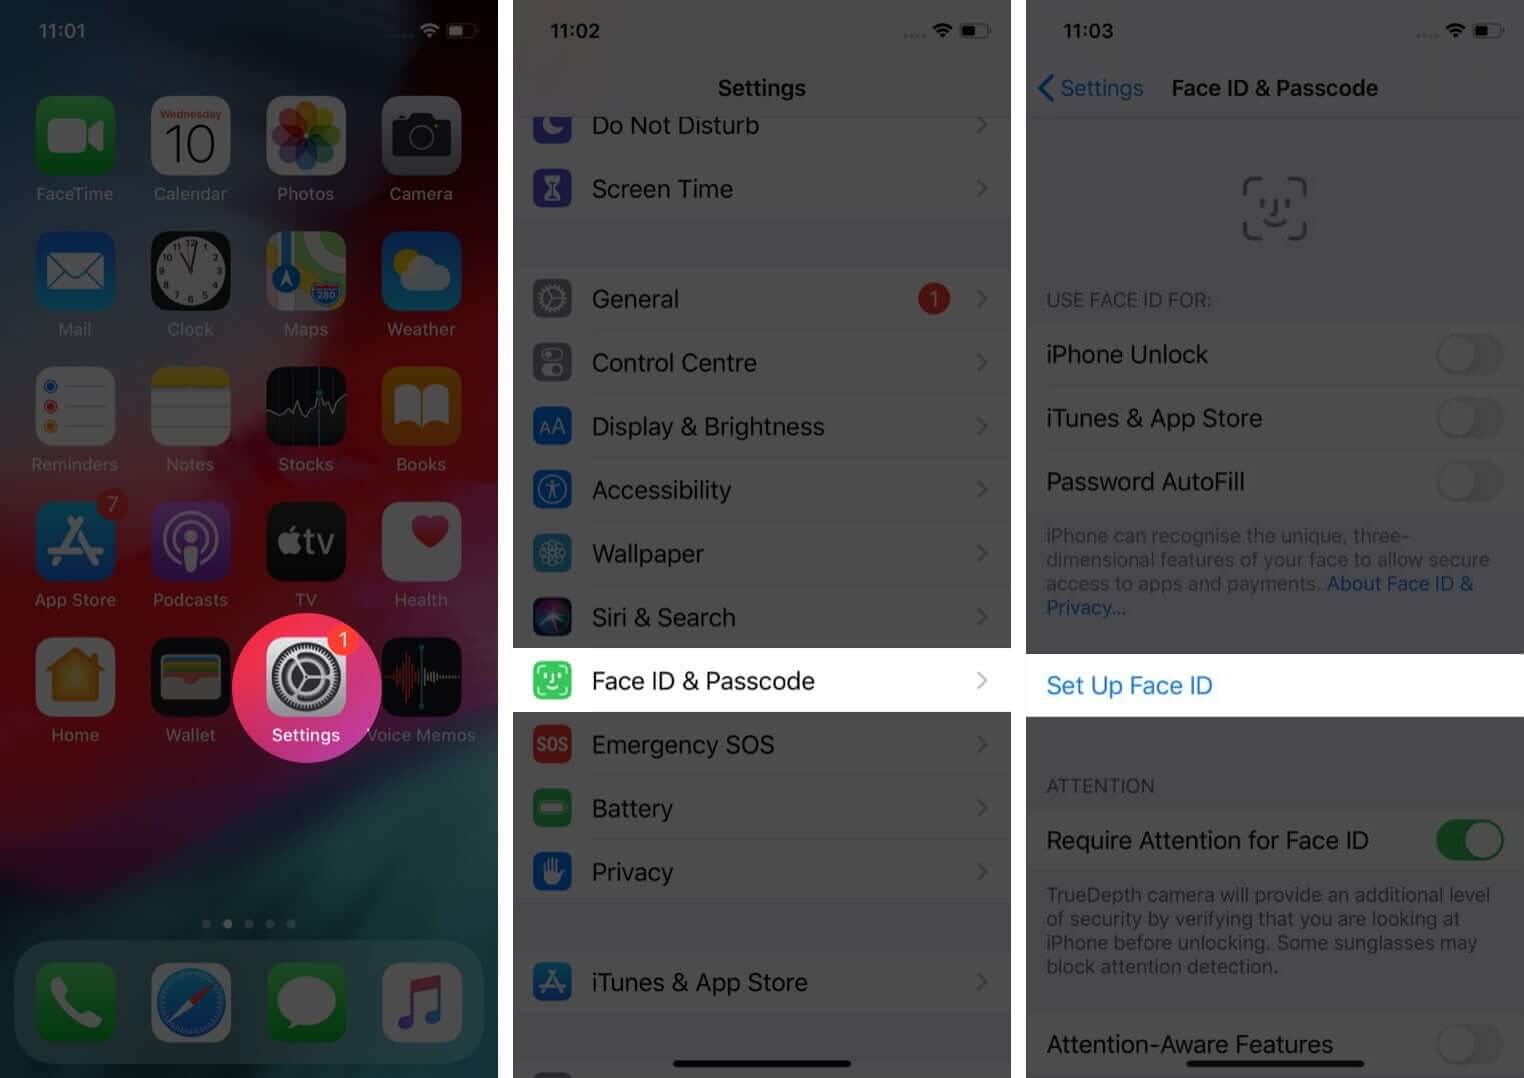 open settings tap on face id & passcode and then tap on set up face id on iphone